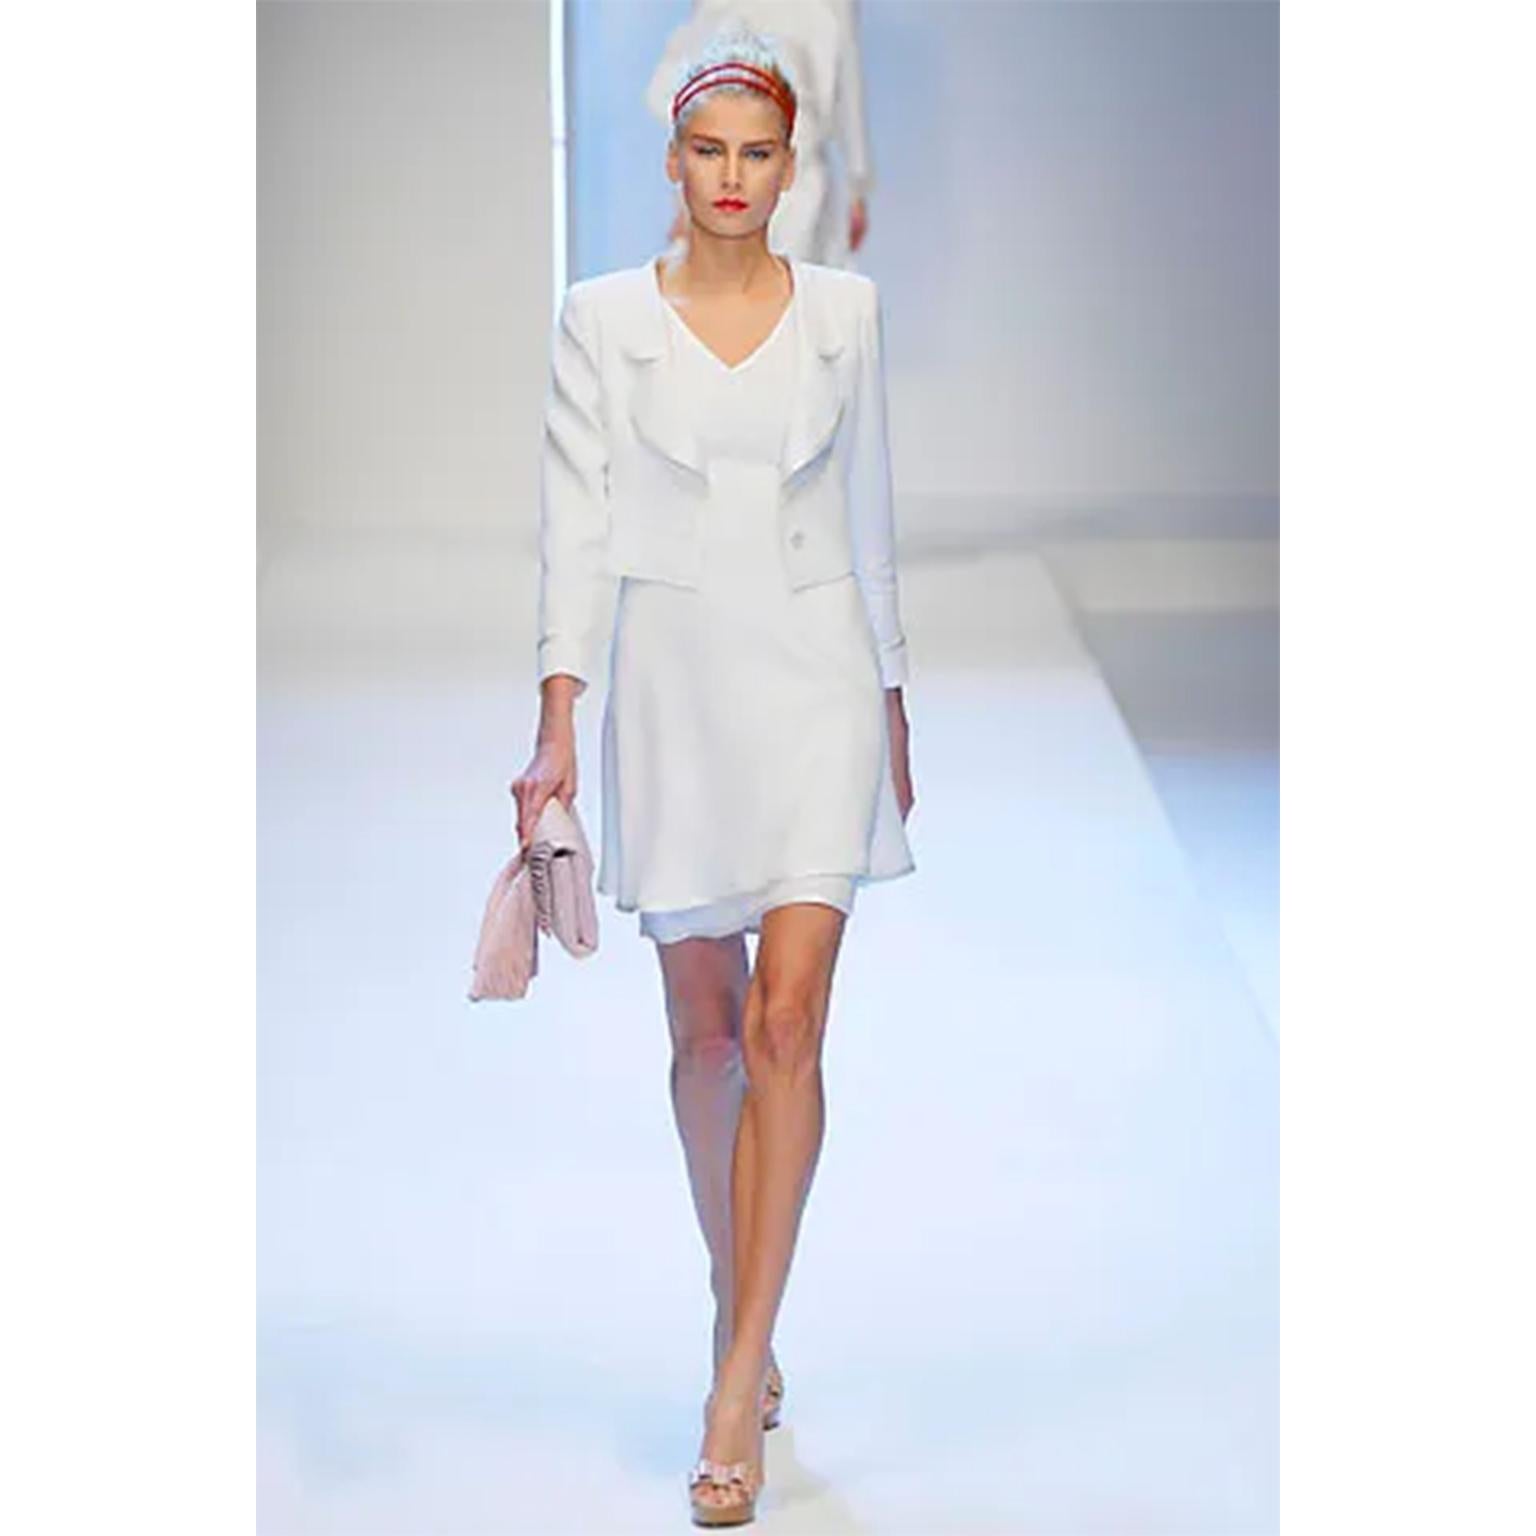 This gorgeous ivory linen Valentino dress and jacket outfit was featured on the runway for the Spring Summer 2007 collection. This is such an effortless, elegant ensemble from Valentino Garavani and we know you will find a million ways to wear the